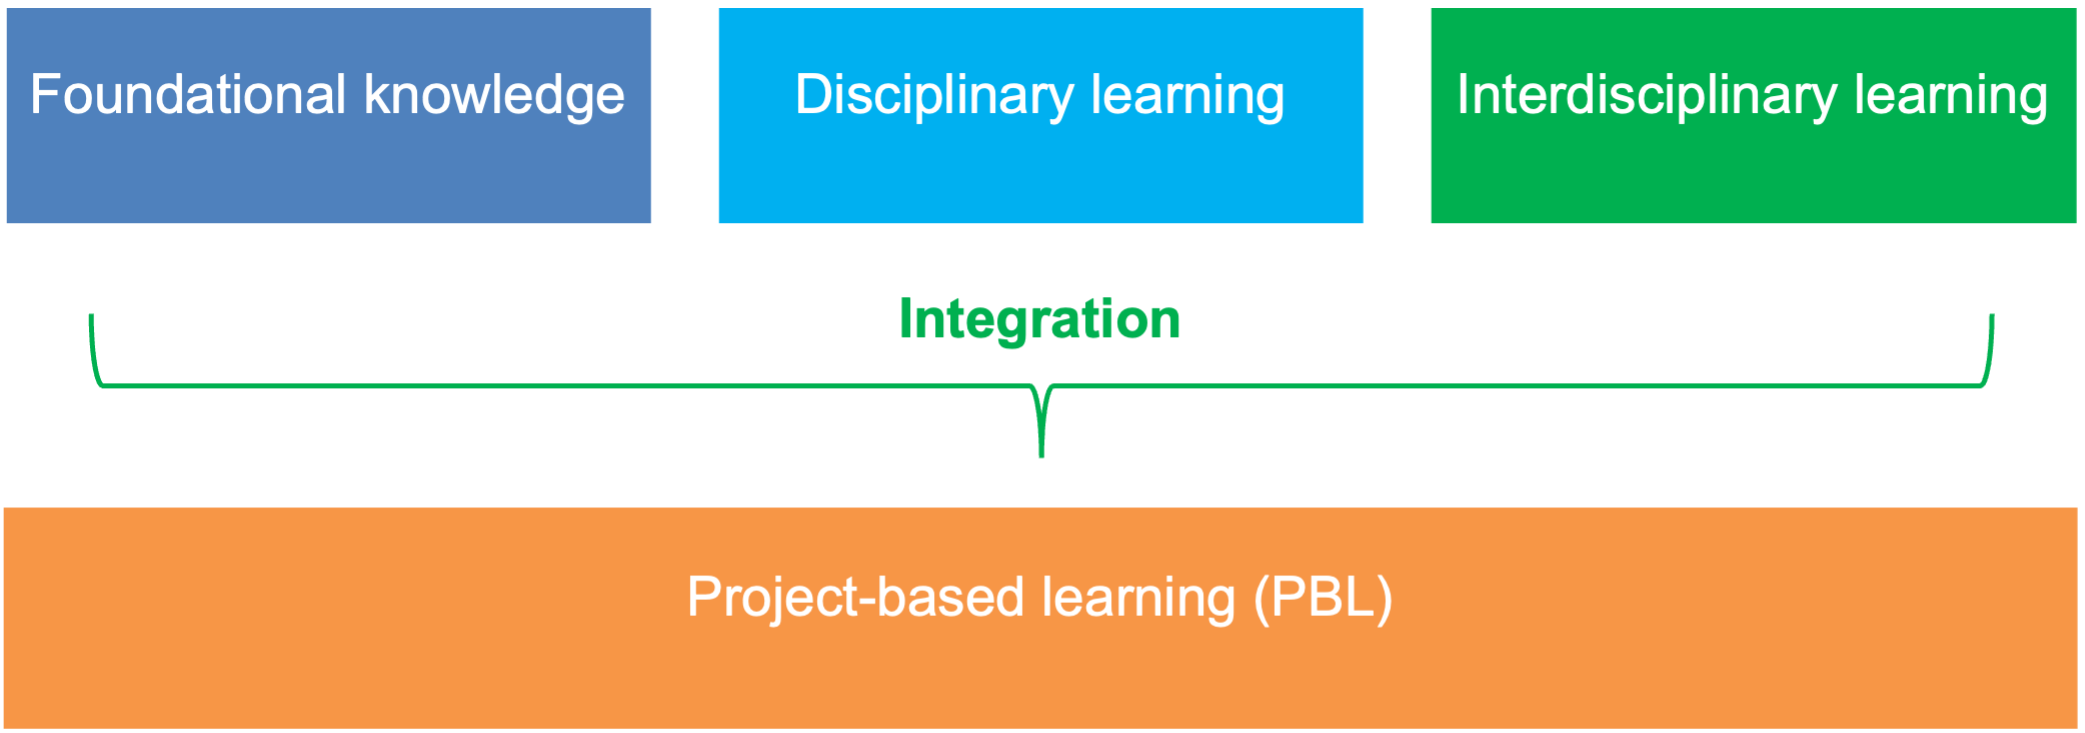 Project based learning acts as an integrative element for foundational knowledge, disciplinary and interdisciplinary learning